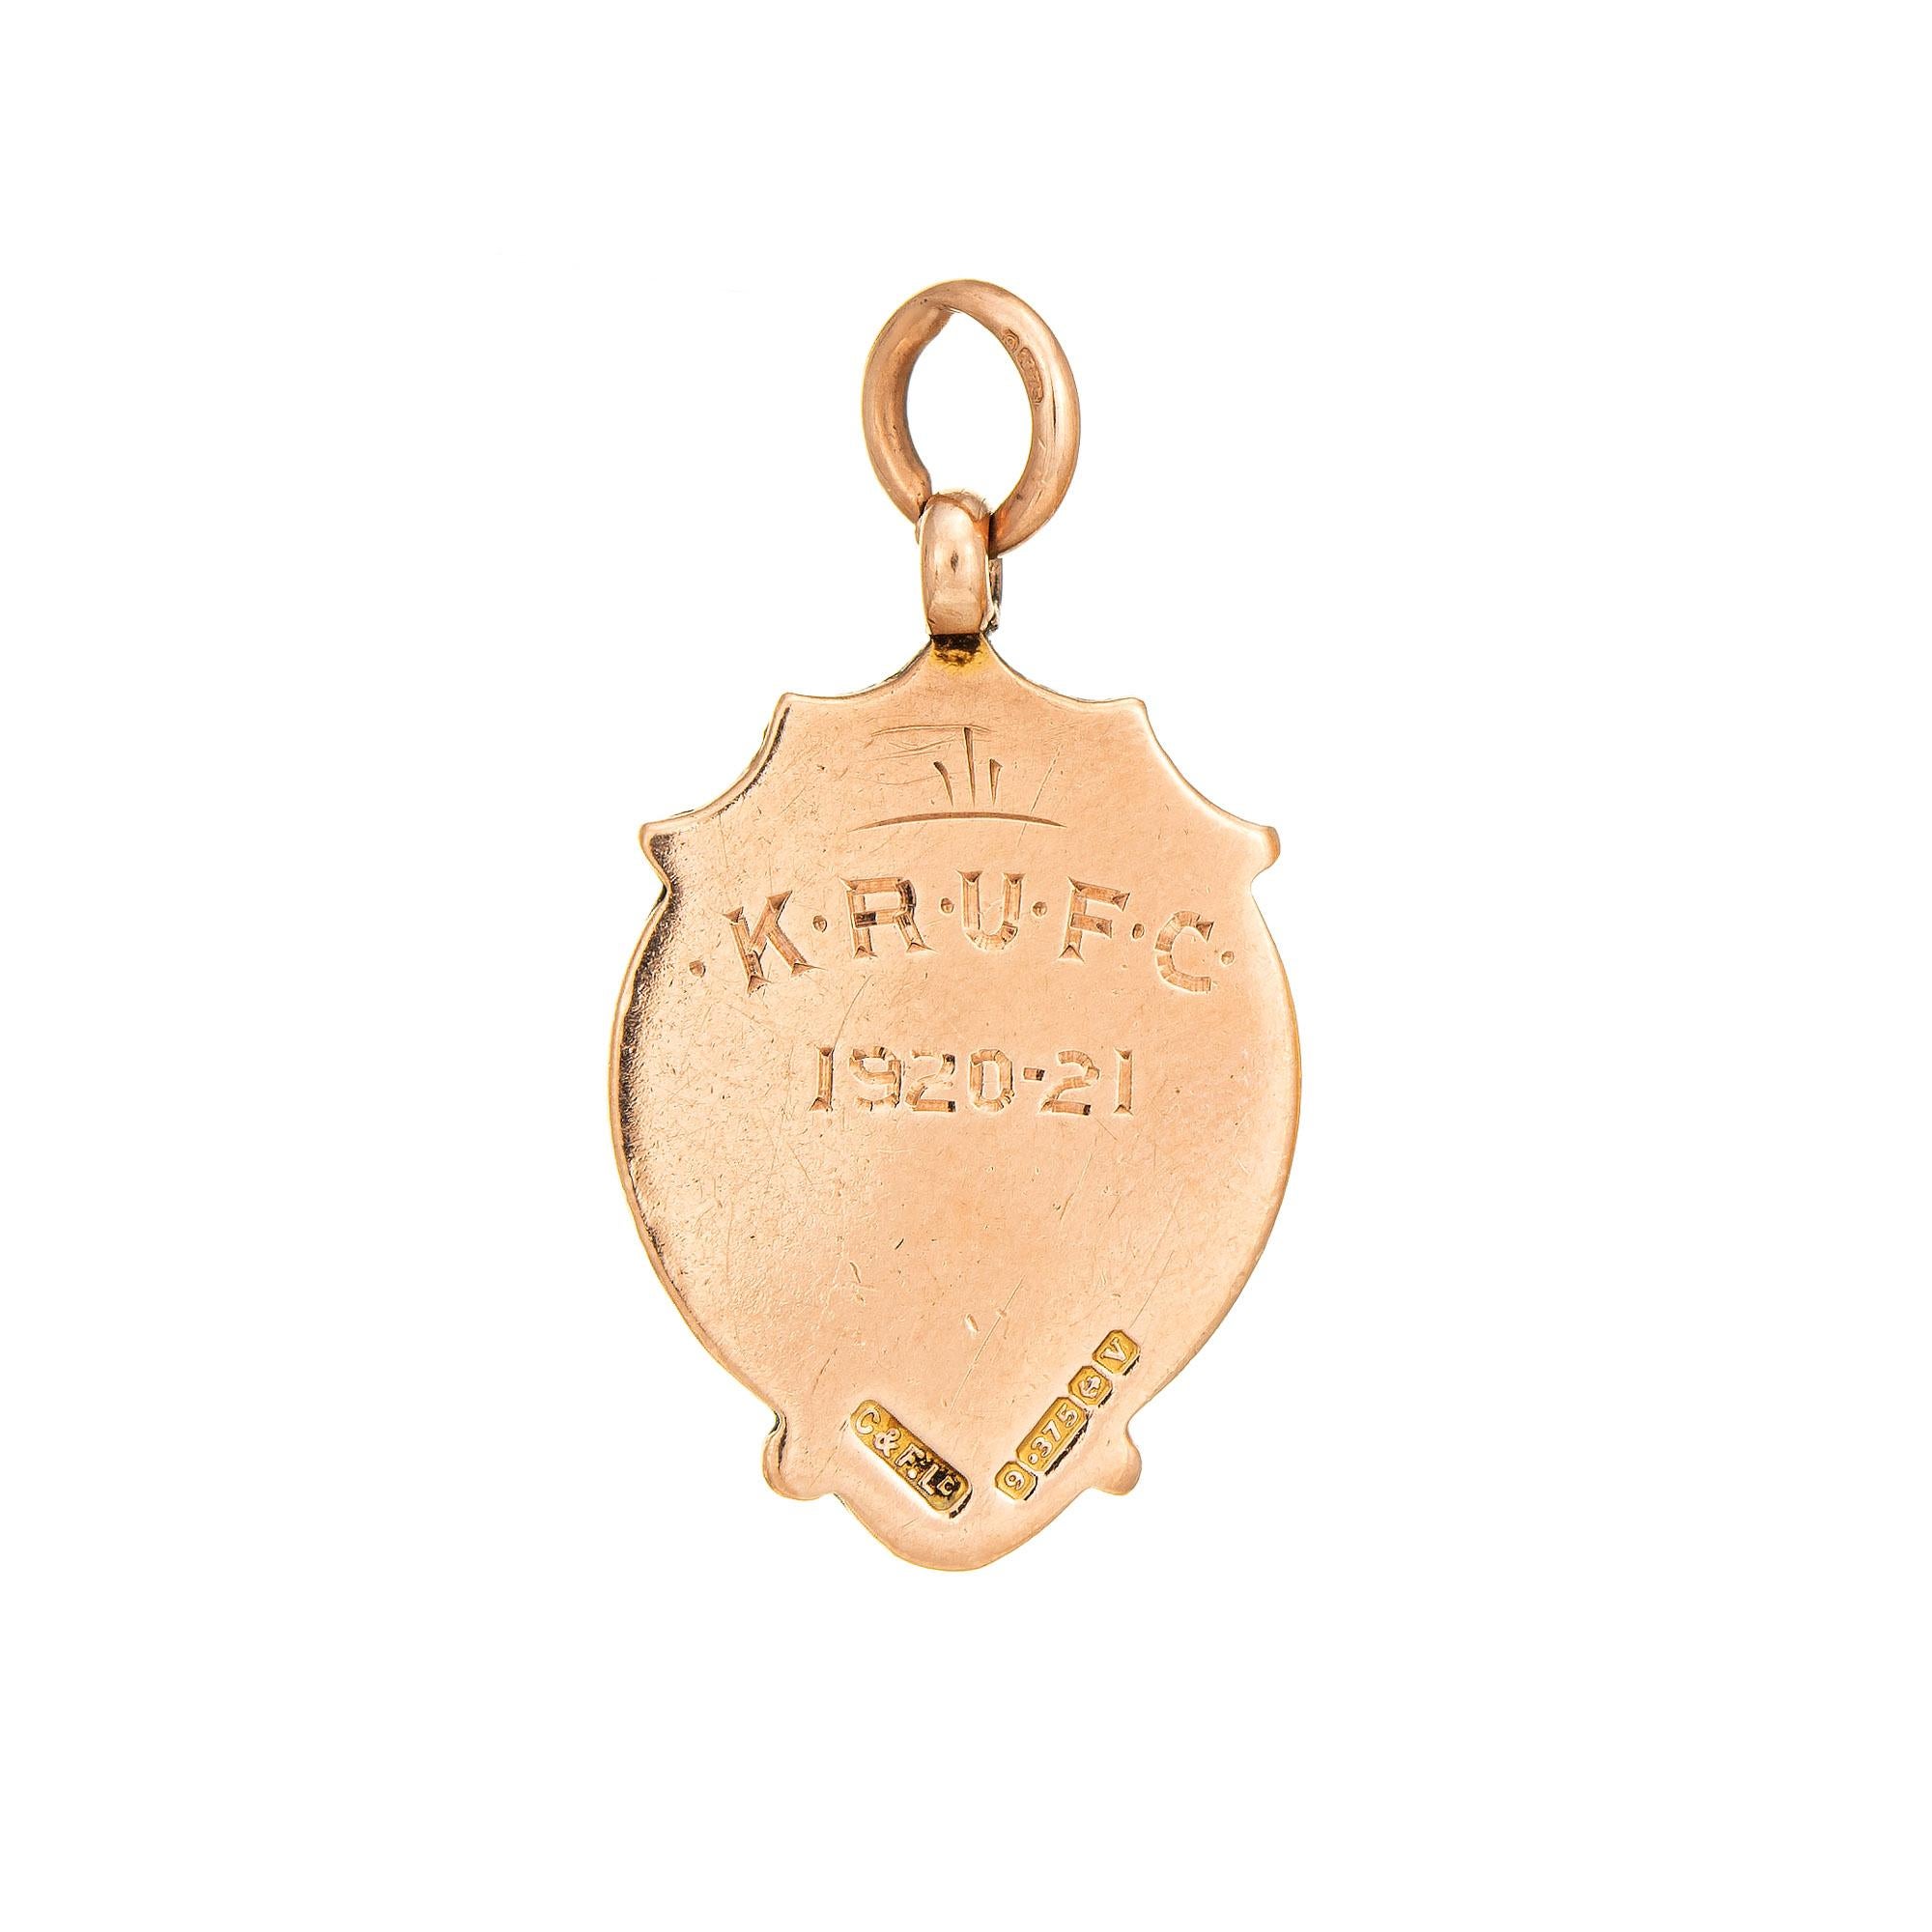 Elaborate antique Art Deco era medallion (circa 1906-7) crafted in 9 karat rose gold. 

The beautifully detailed medallion dates to 1920-21, designed with a football motif to commemorate the season (given the shape of the ball we believe the sport